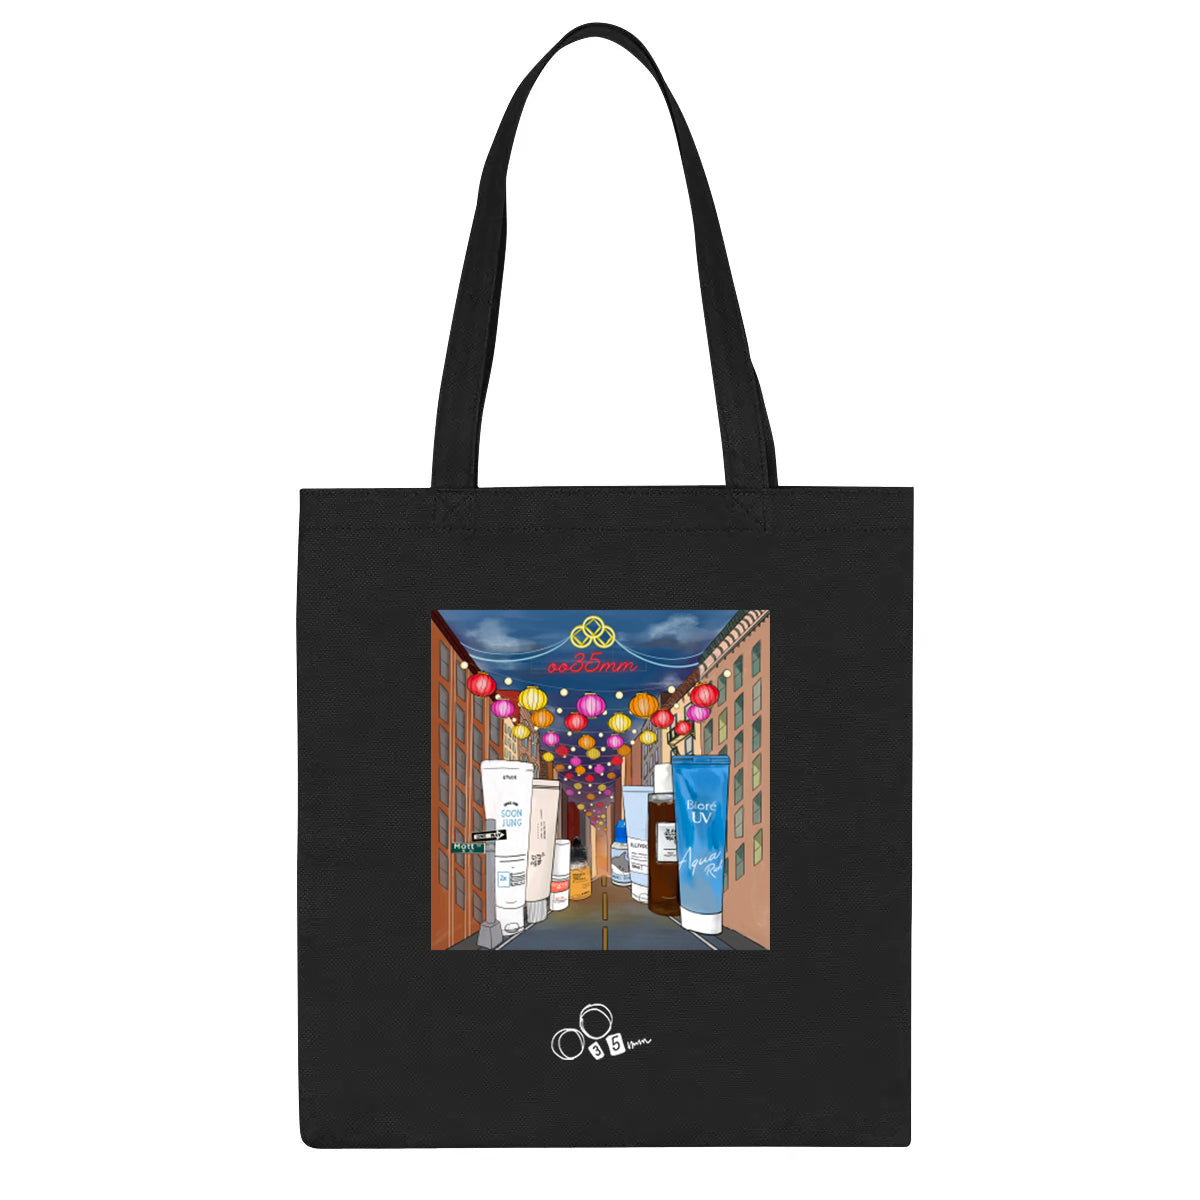 New Year Tote Shopping Totes oo35mm   